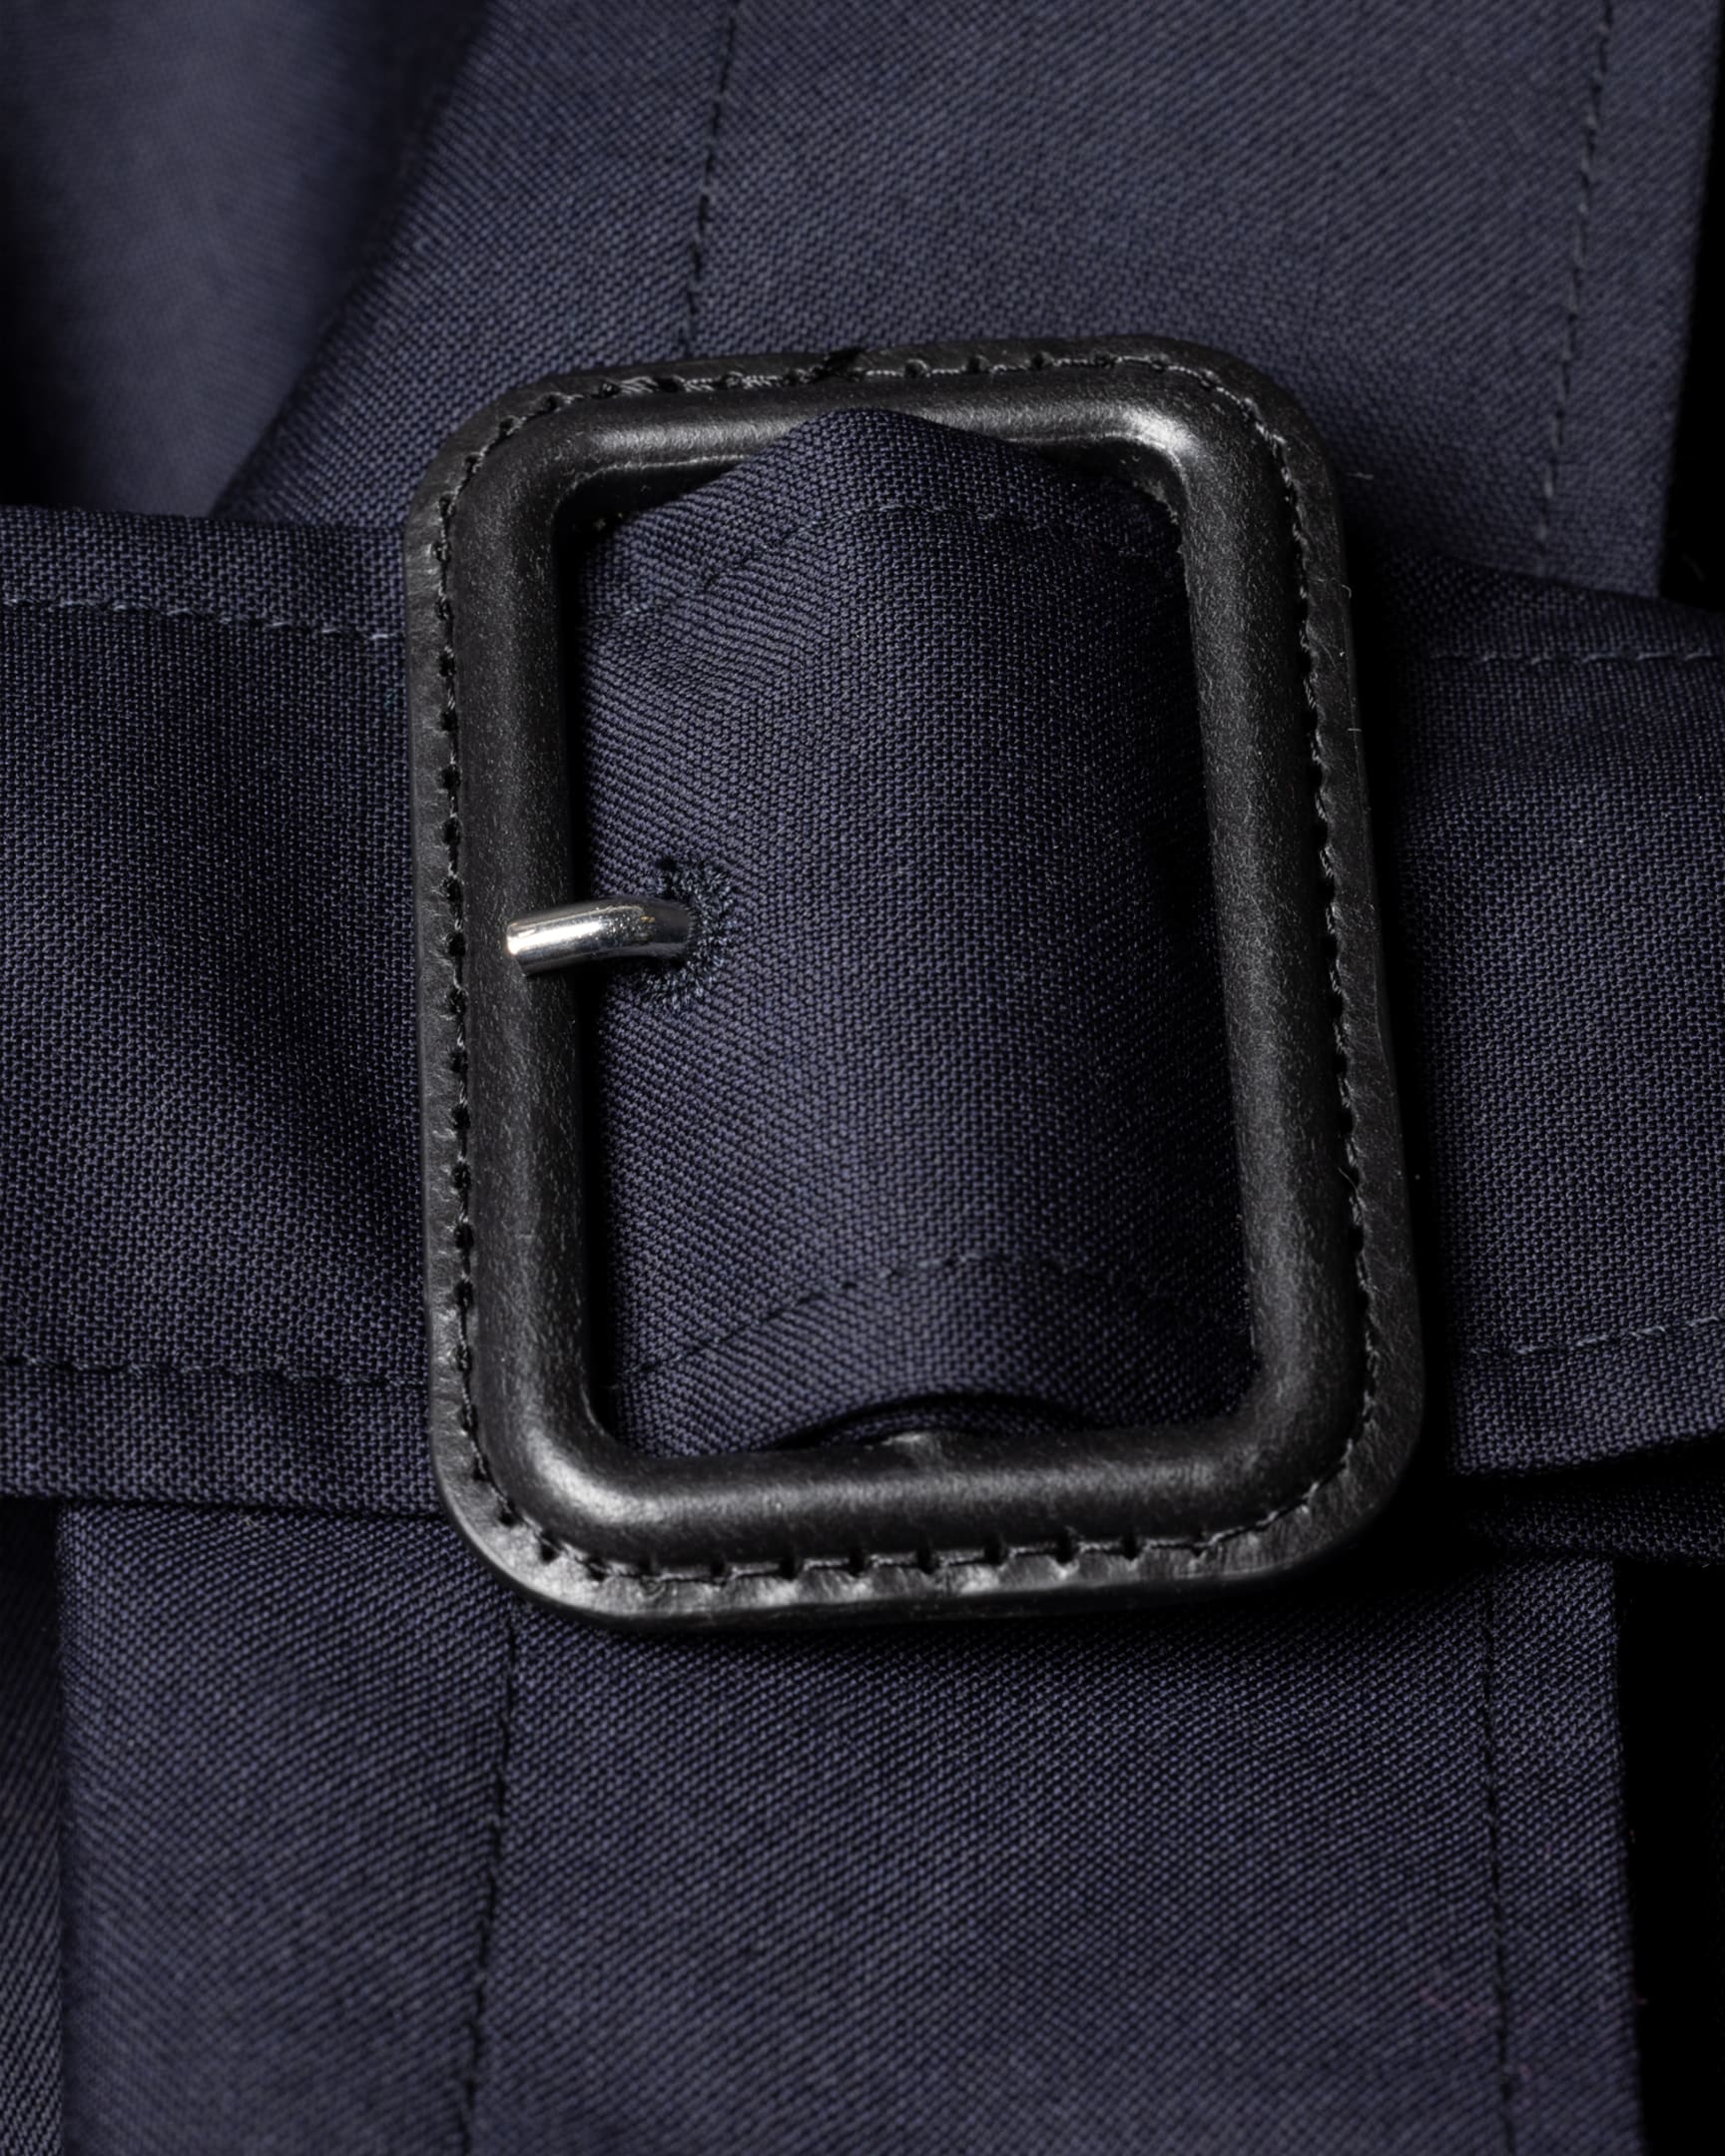 Detail View - Women's Navy 'Storm System Wool' Mac With Detachable Liner Paul Smith